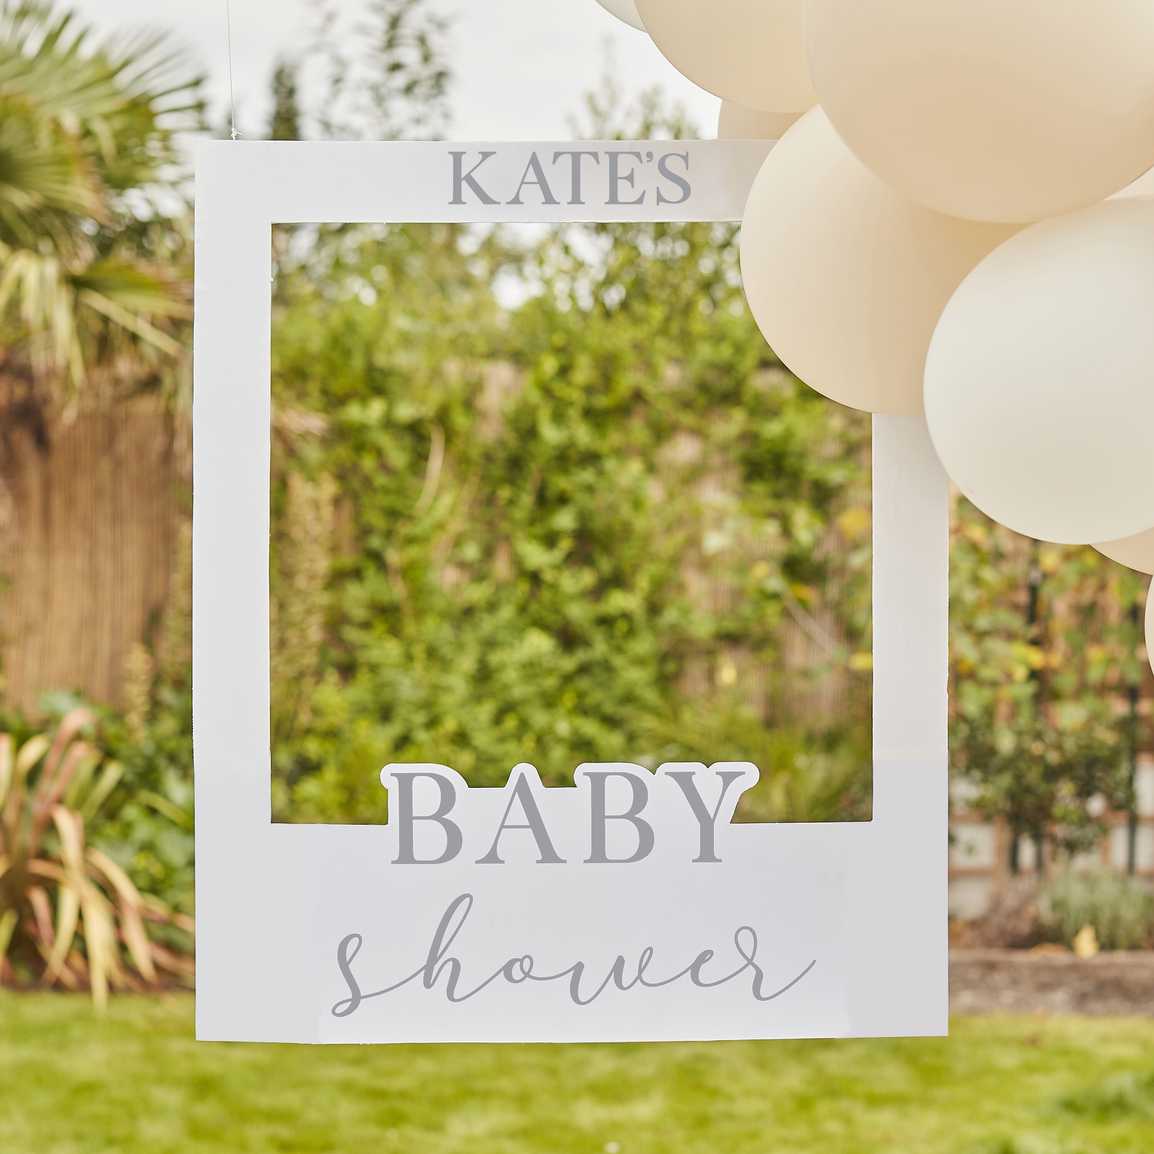 Ginger Ray Customisable Baby Shower Photo Booth Frame